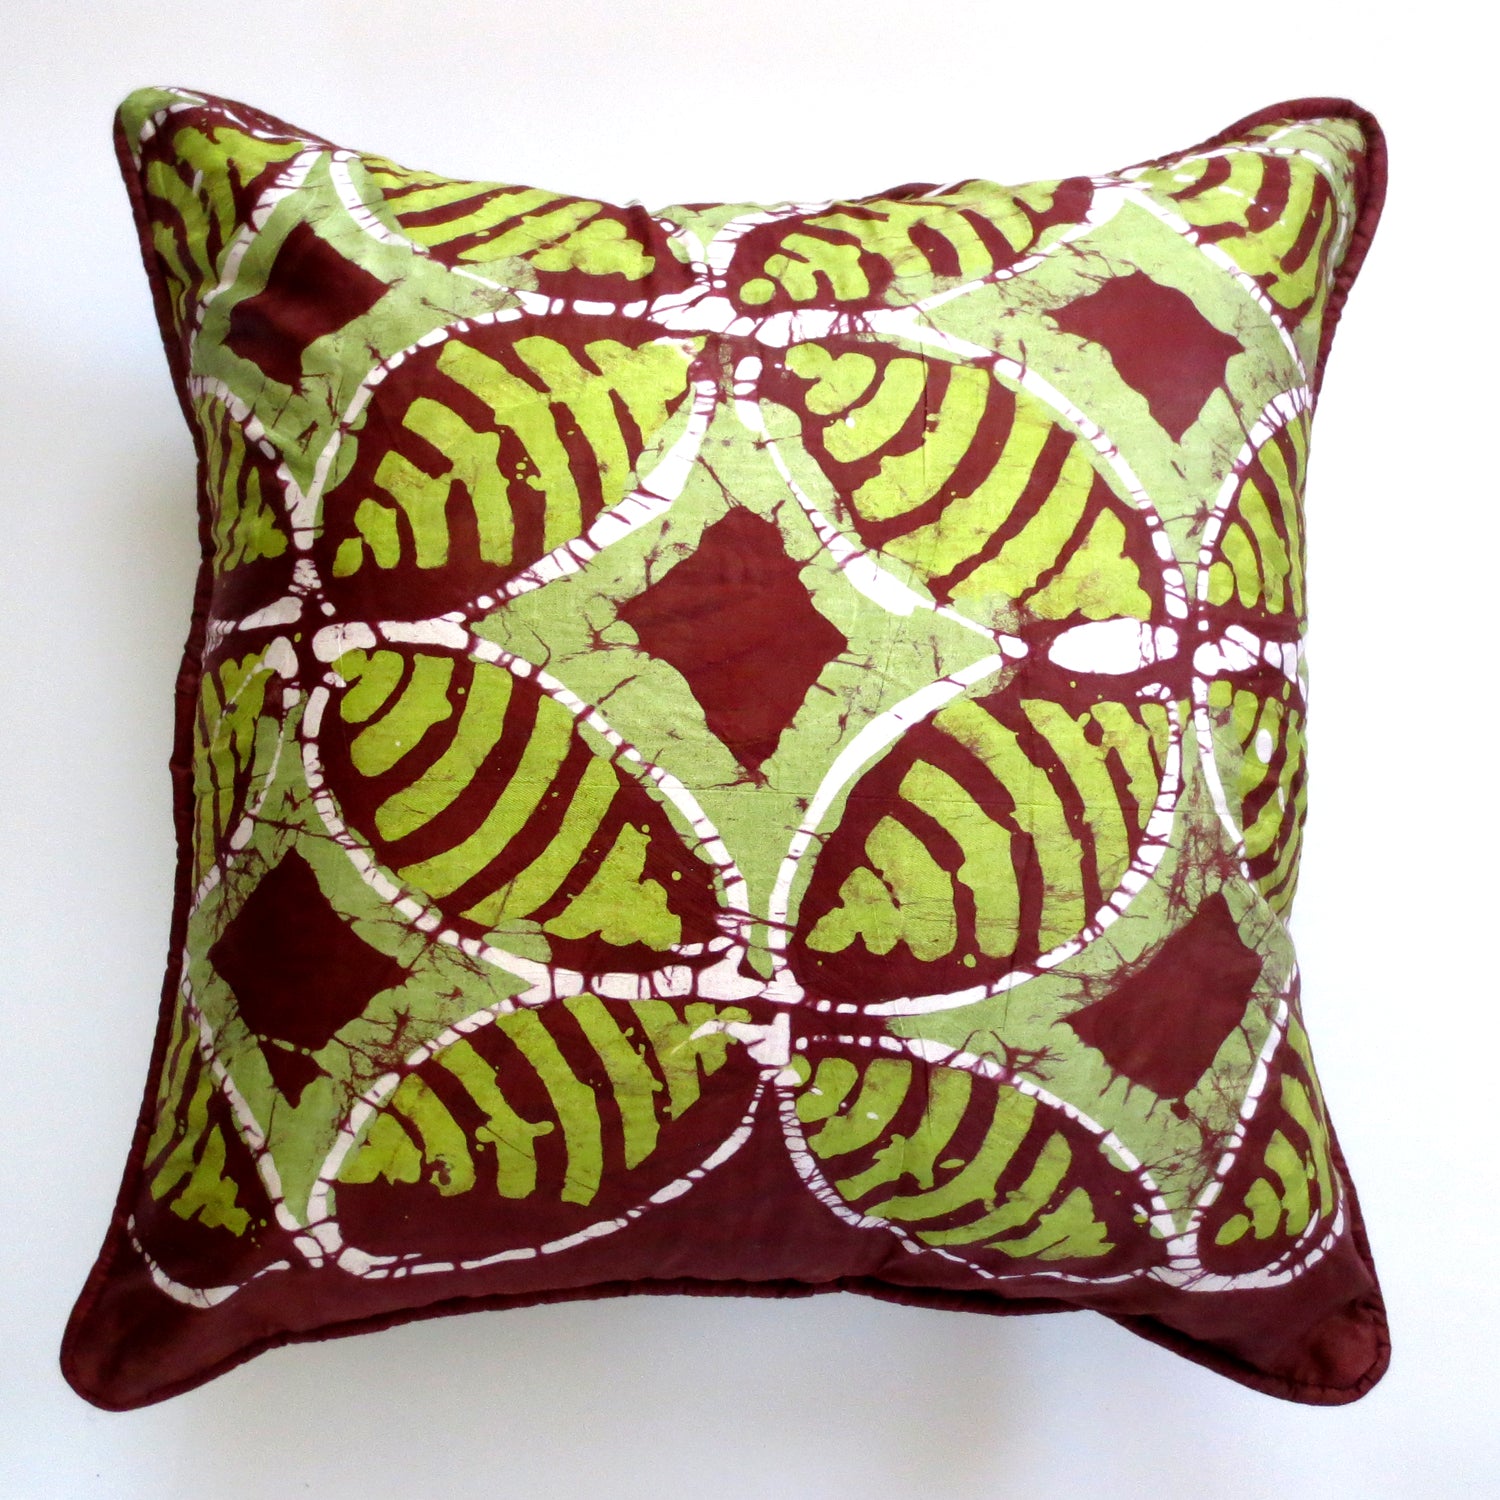 20"x20" pillow cover. Chartreuse, white and copper motif.